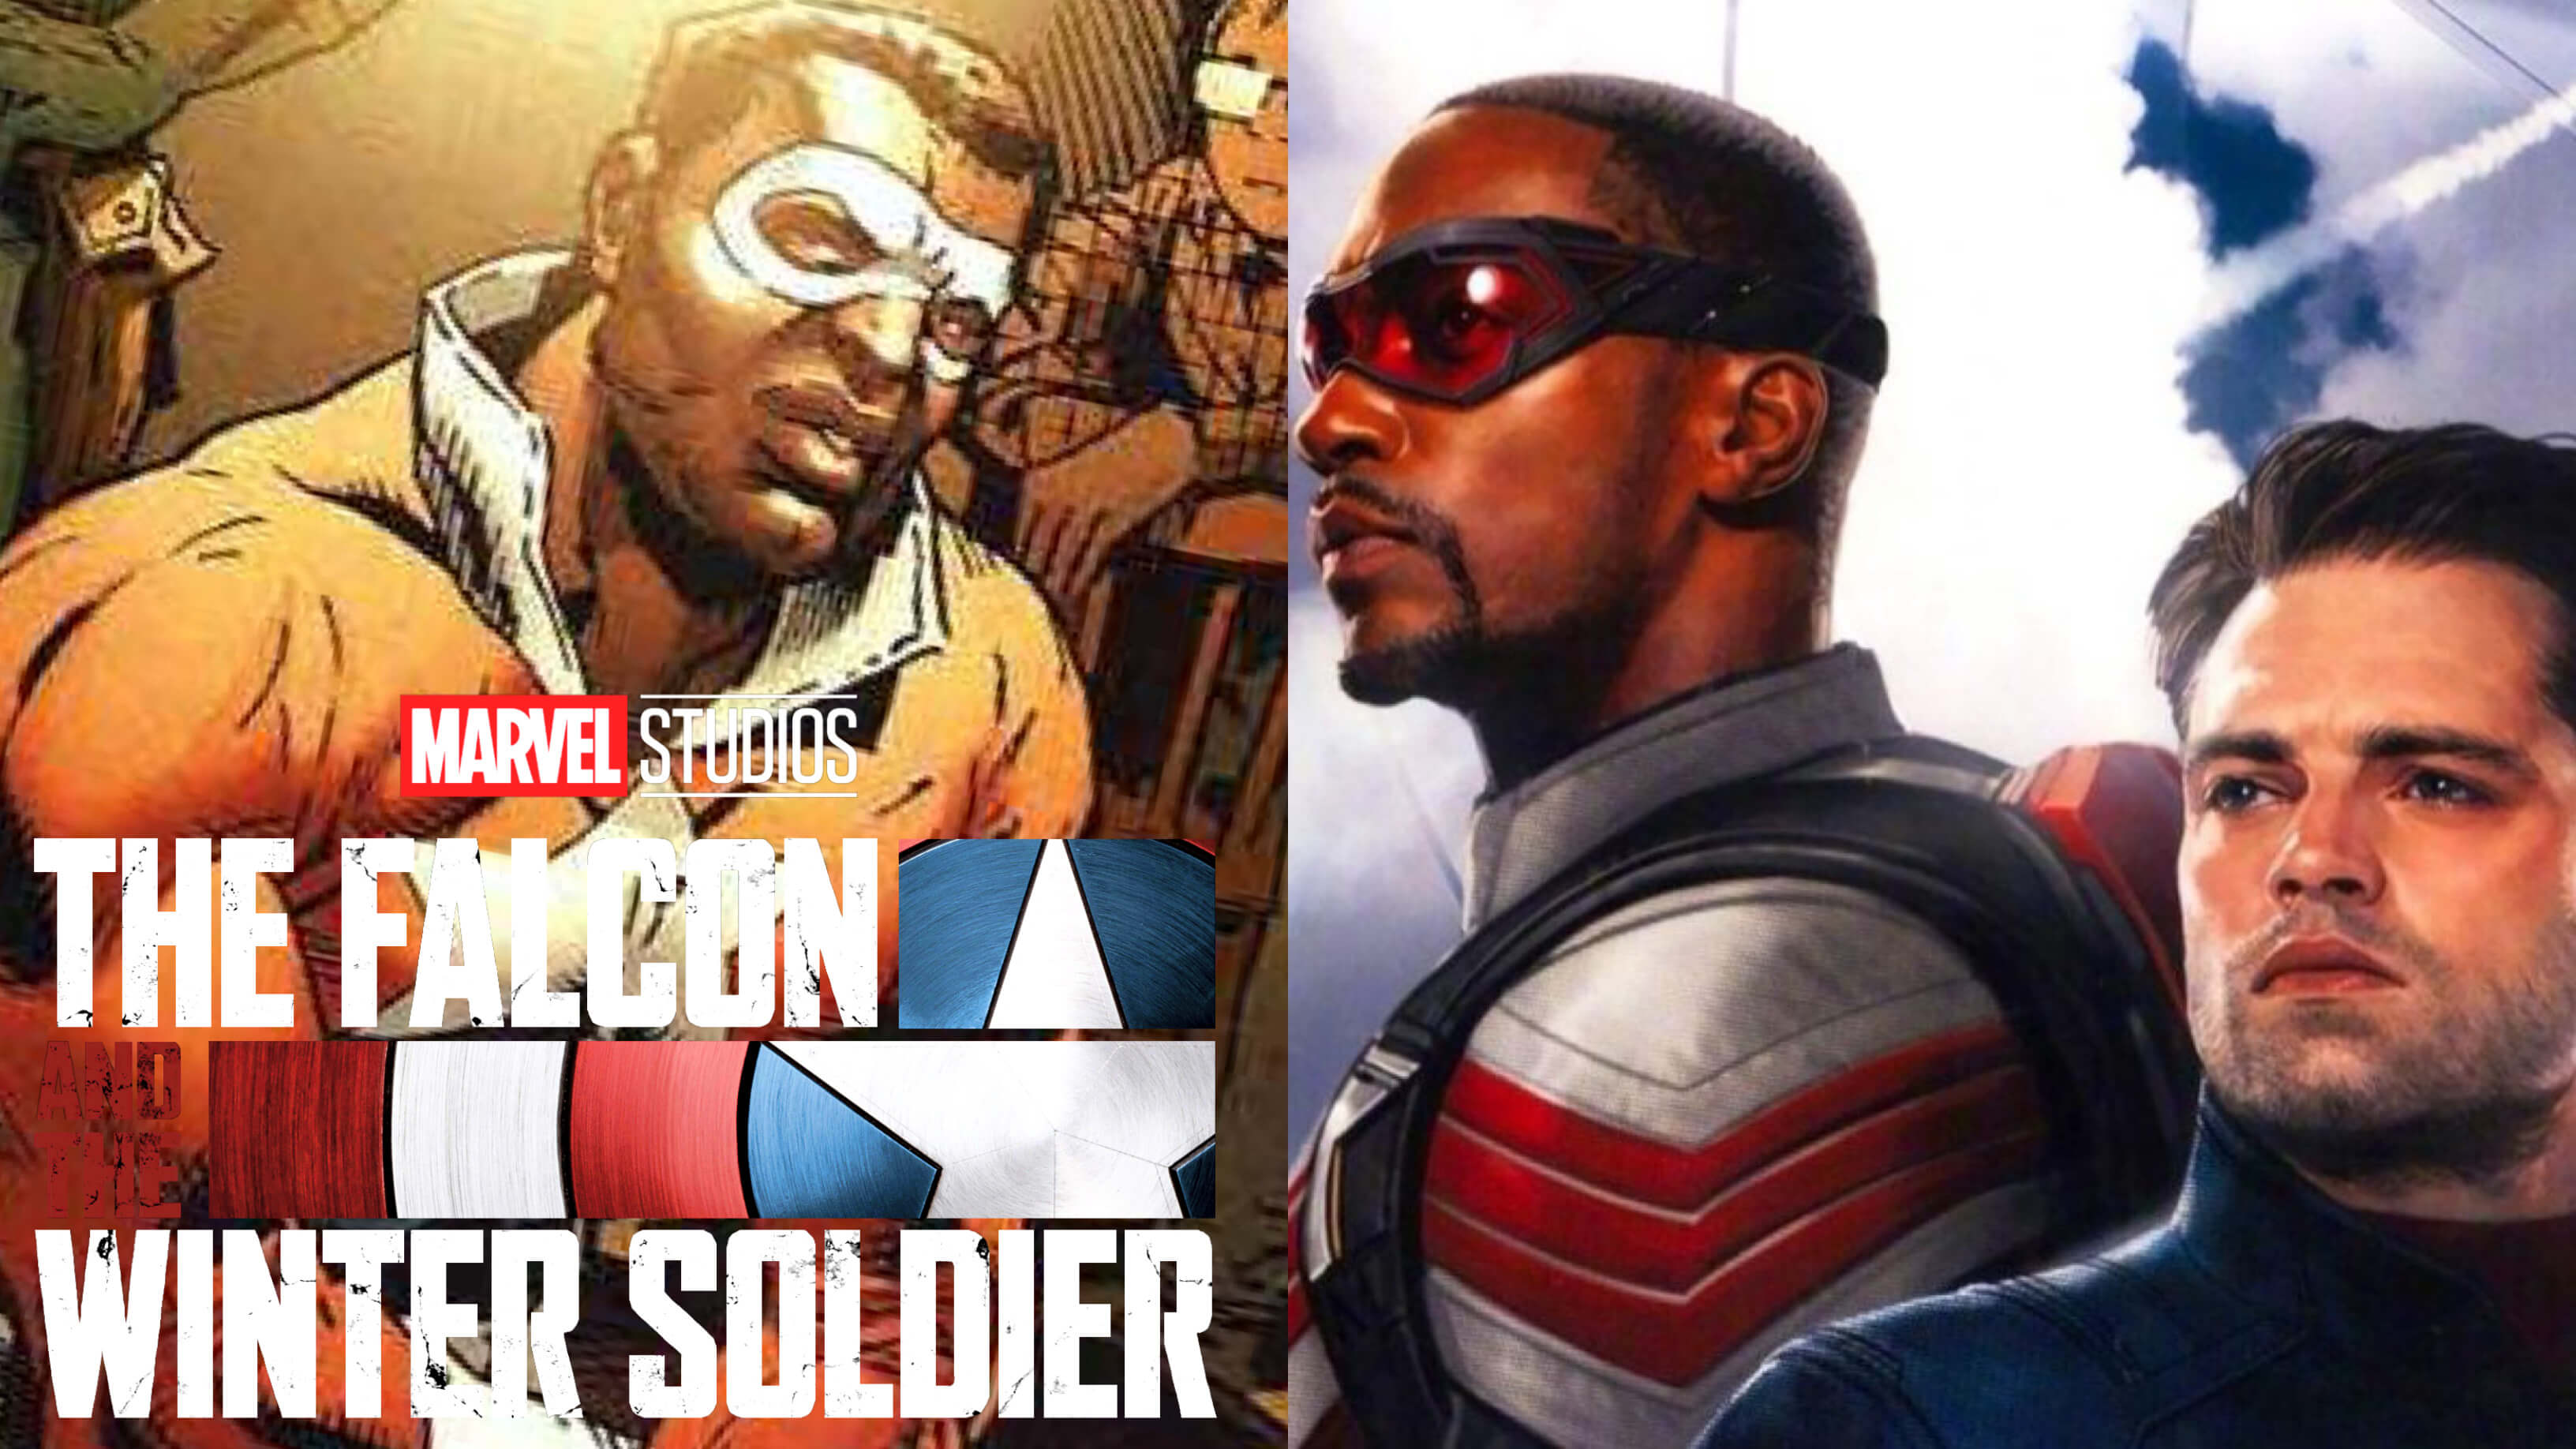 ‘The Falcon and the Winter Soldier’ Will Introduce Lemar Hoskins aka Battlestar